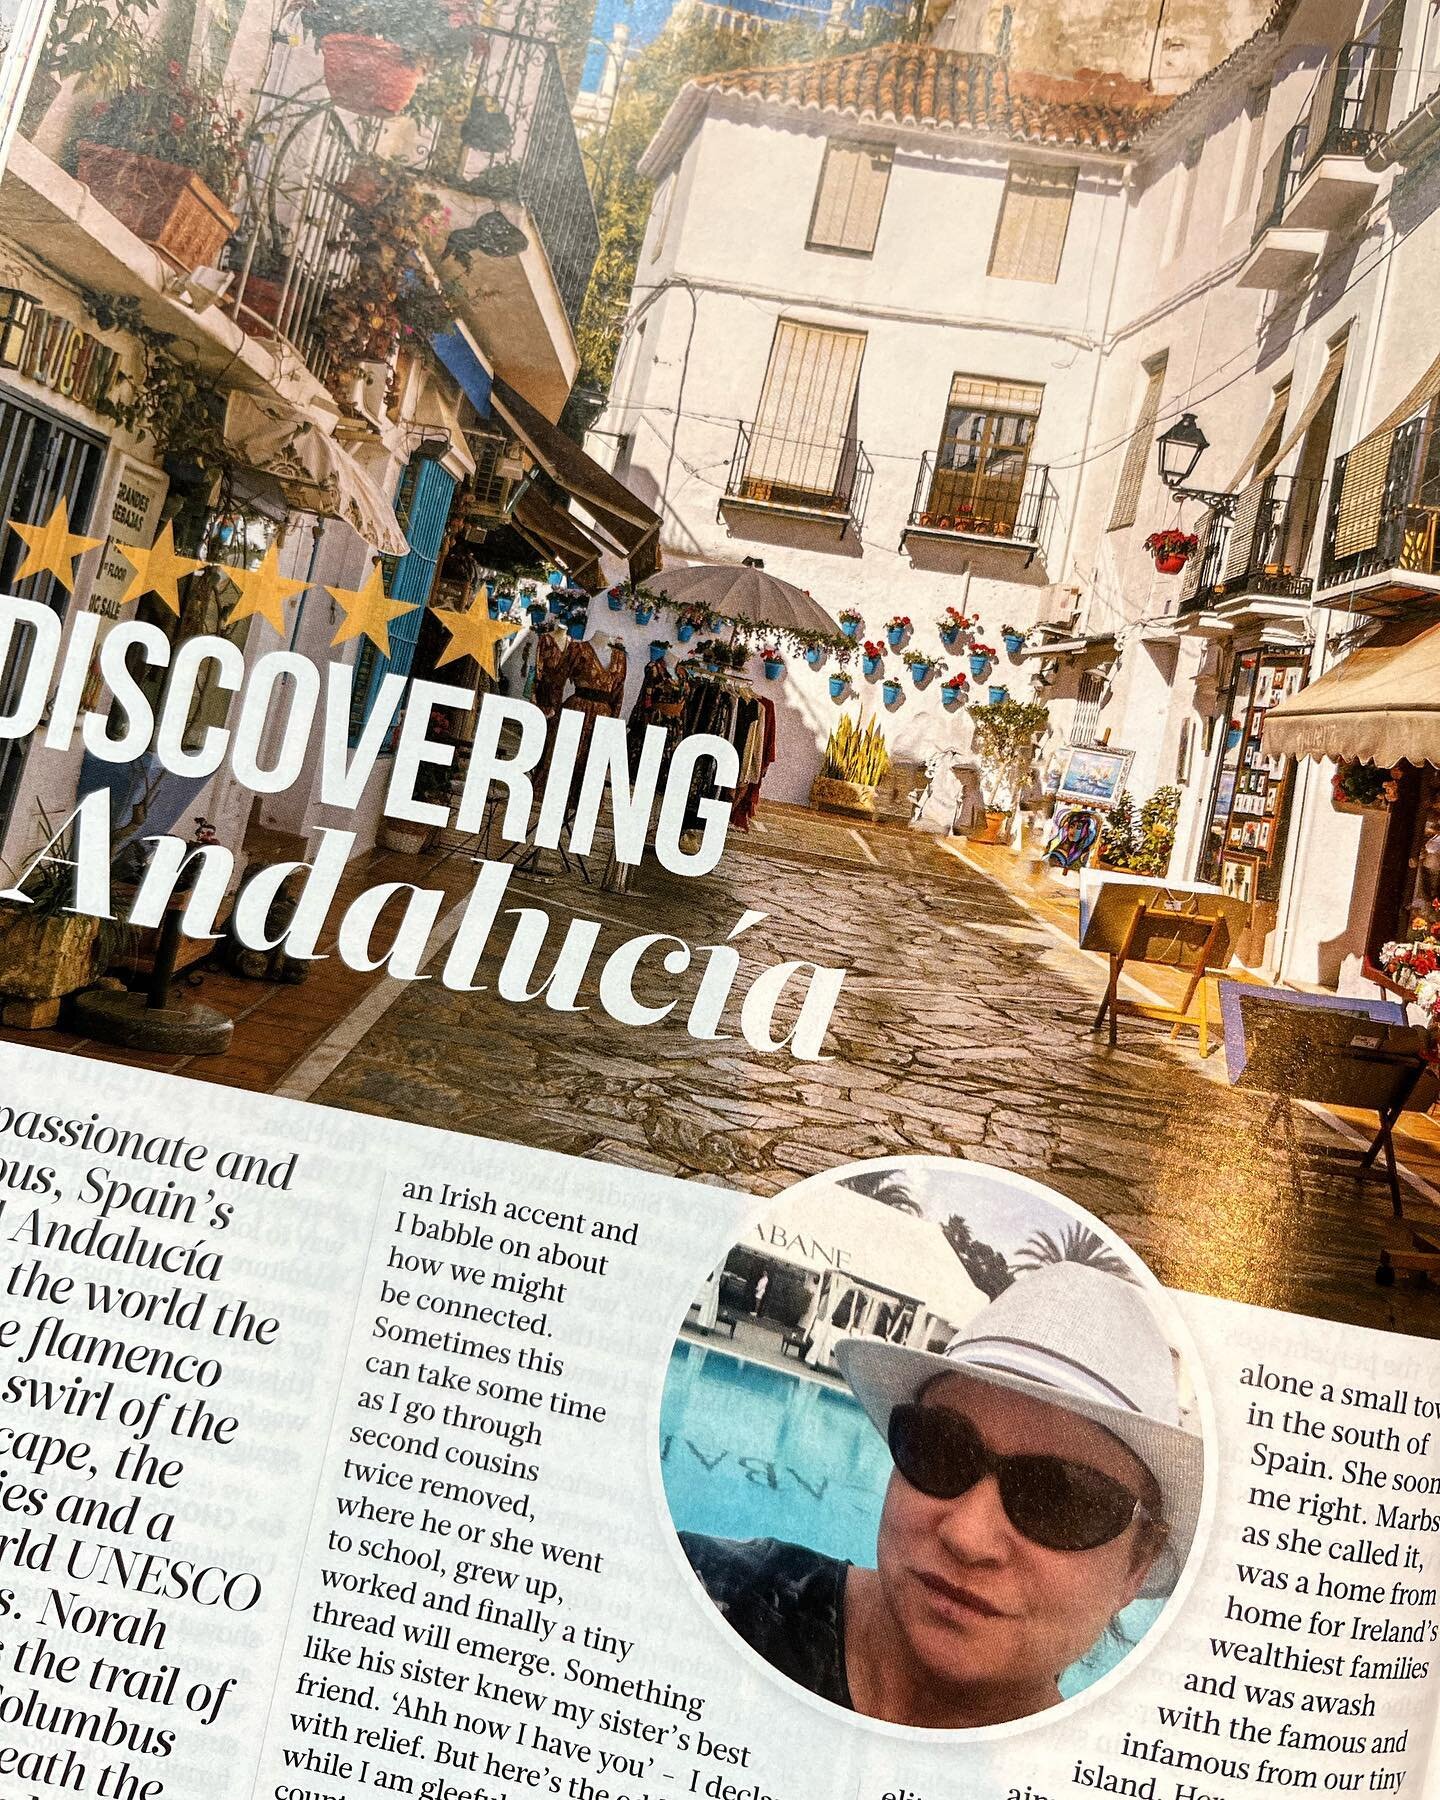 Distract yourself from the dismal weather out there, with our feature on beautiful Andalucia @norah_casey in the new issue out now.
.
.
#travel #rainydayreads #travelwriting #magazine #supportirish #greatreads